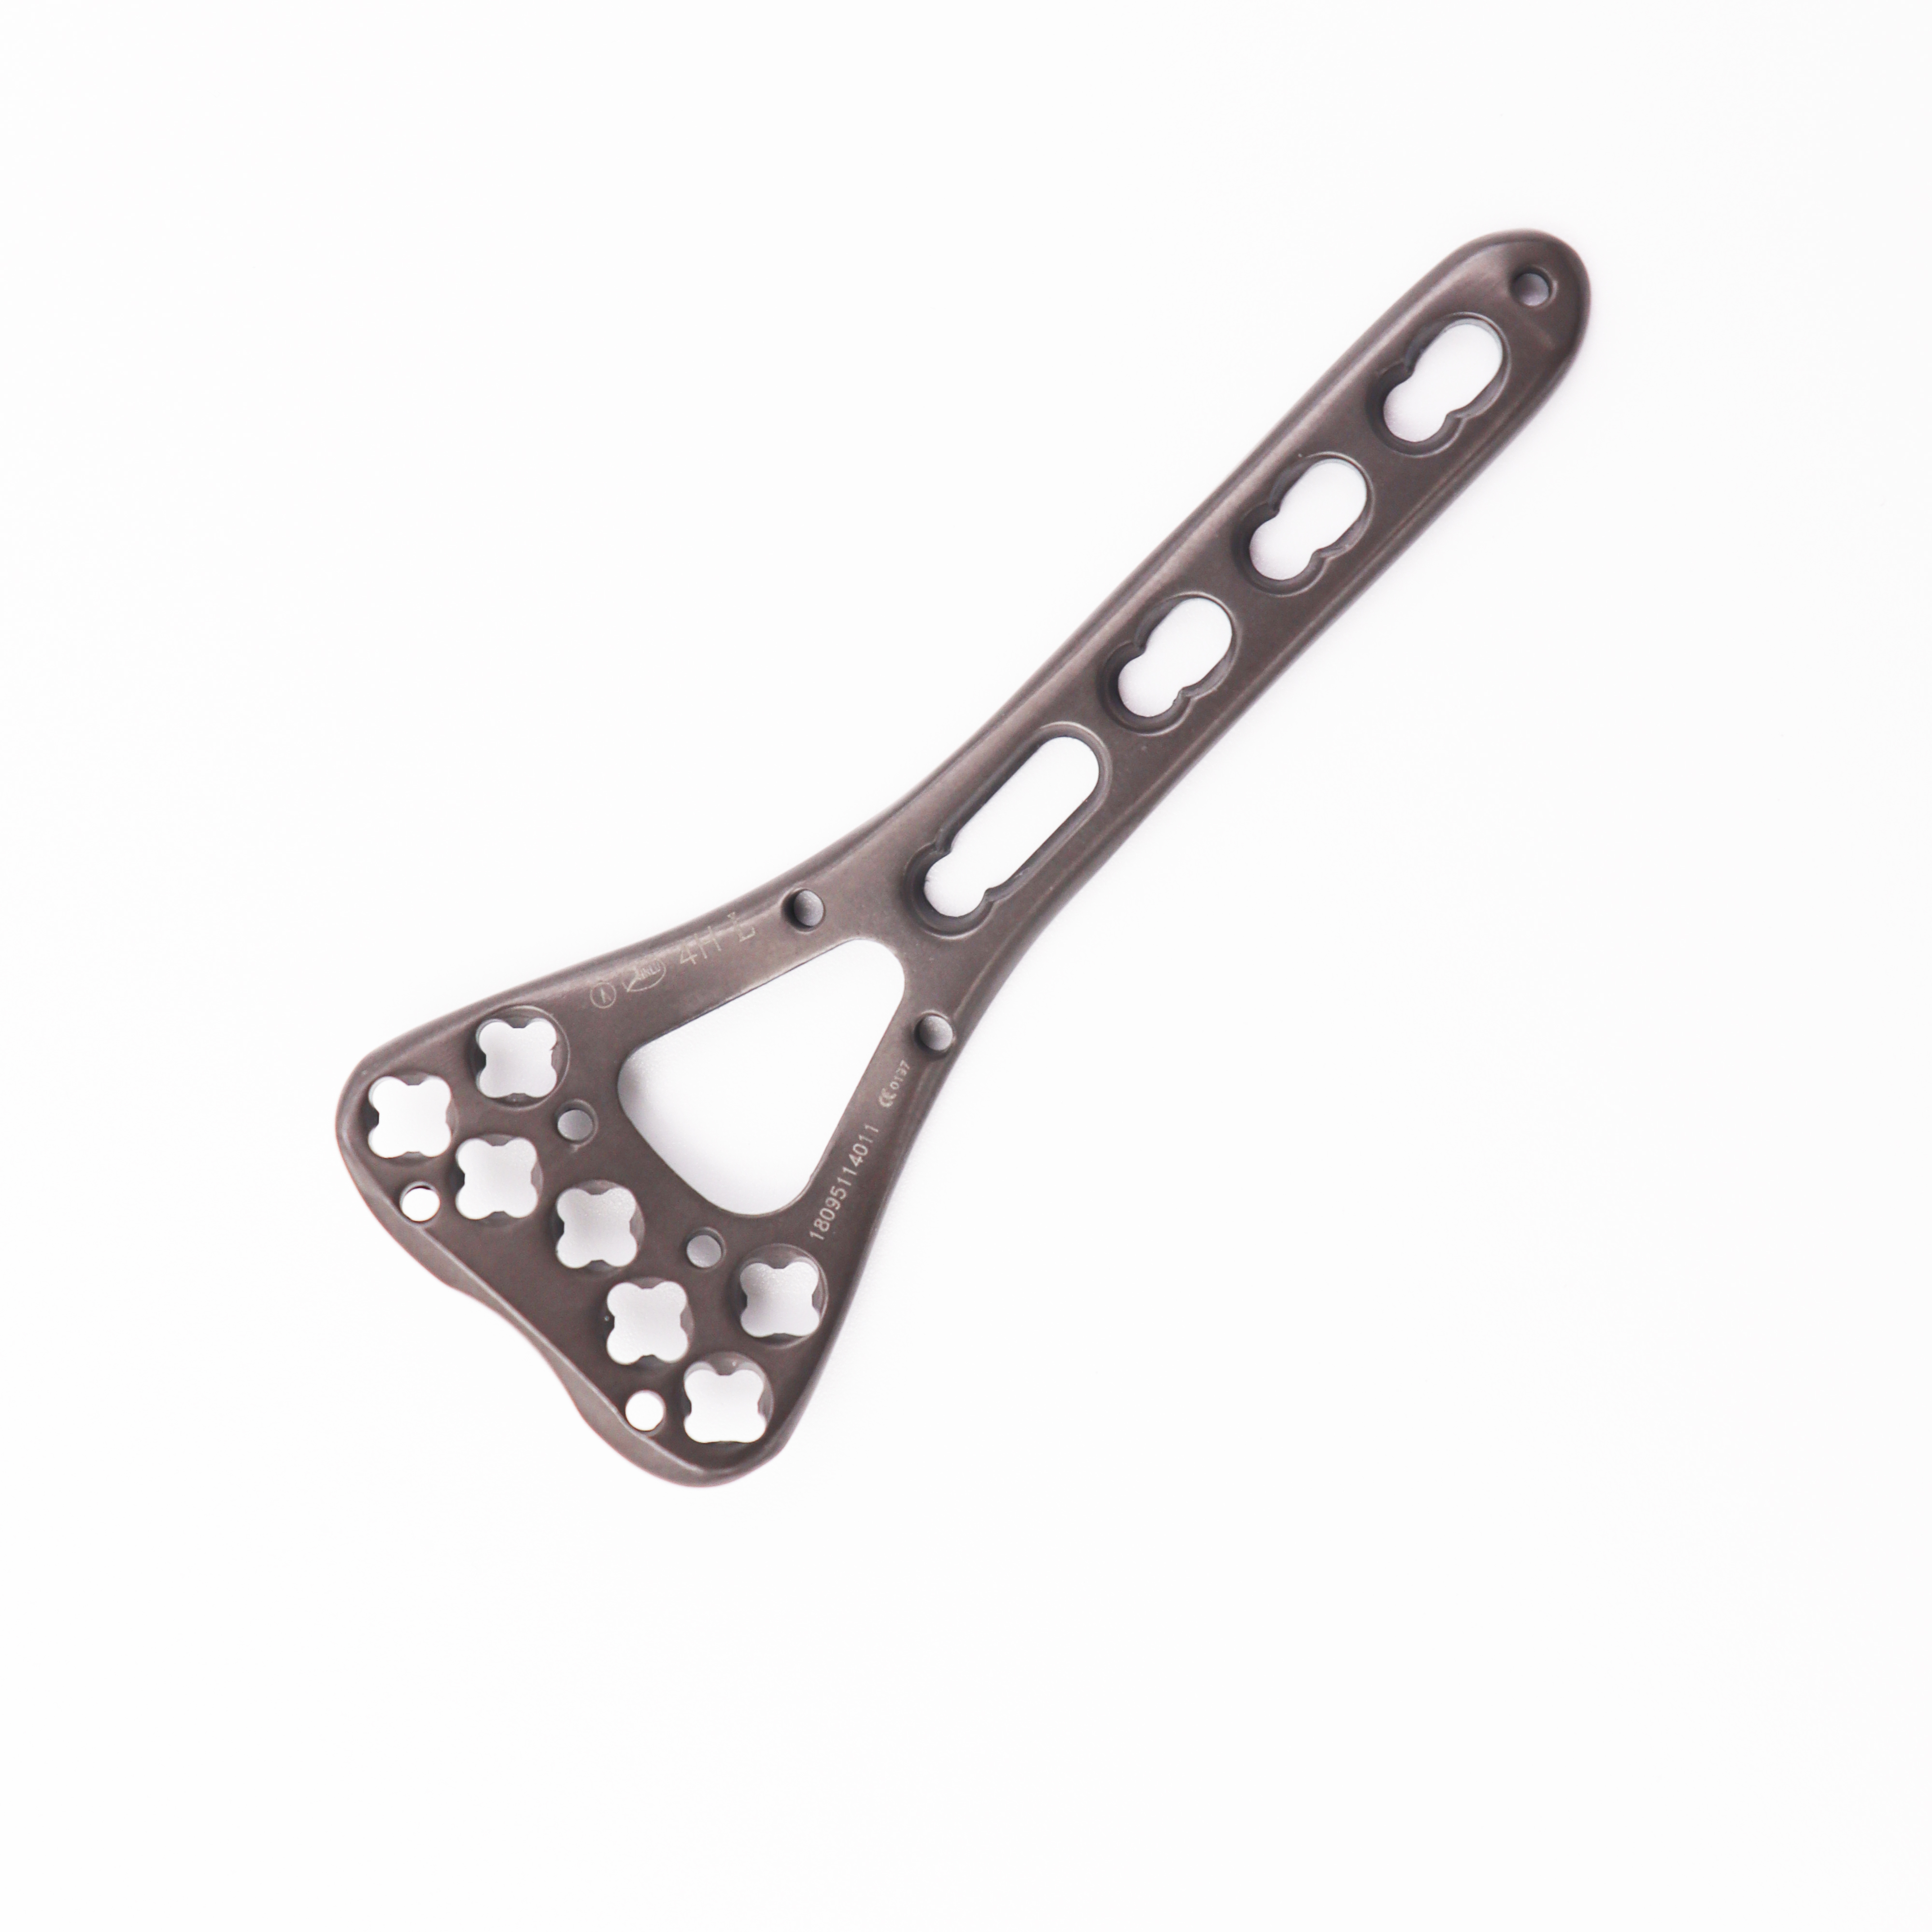 Interventional Materials Orthopedic Implants Multi-axial Distal Radius oblique T-type Locking Plate for left/right